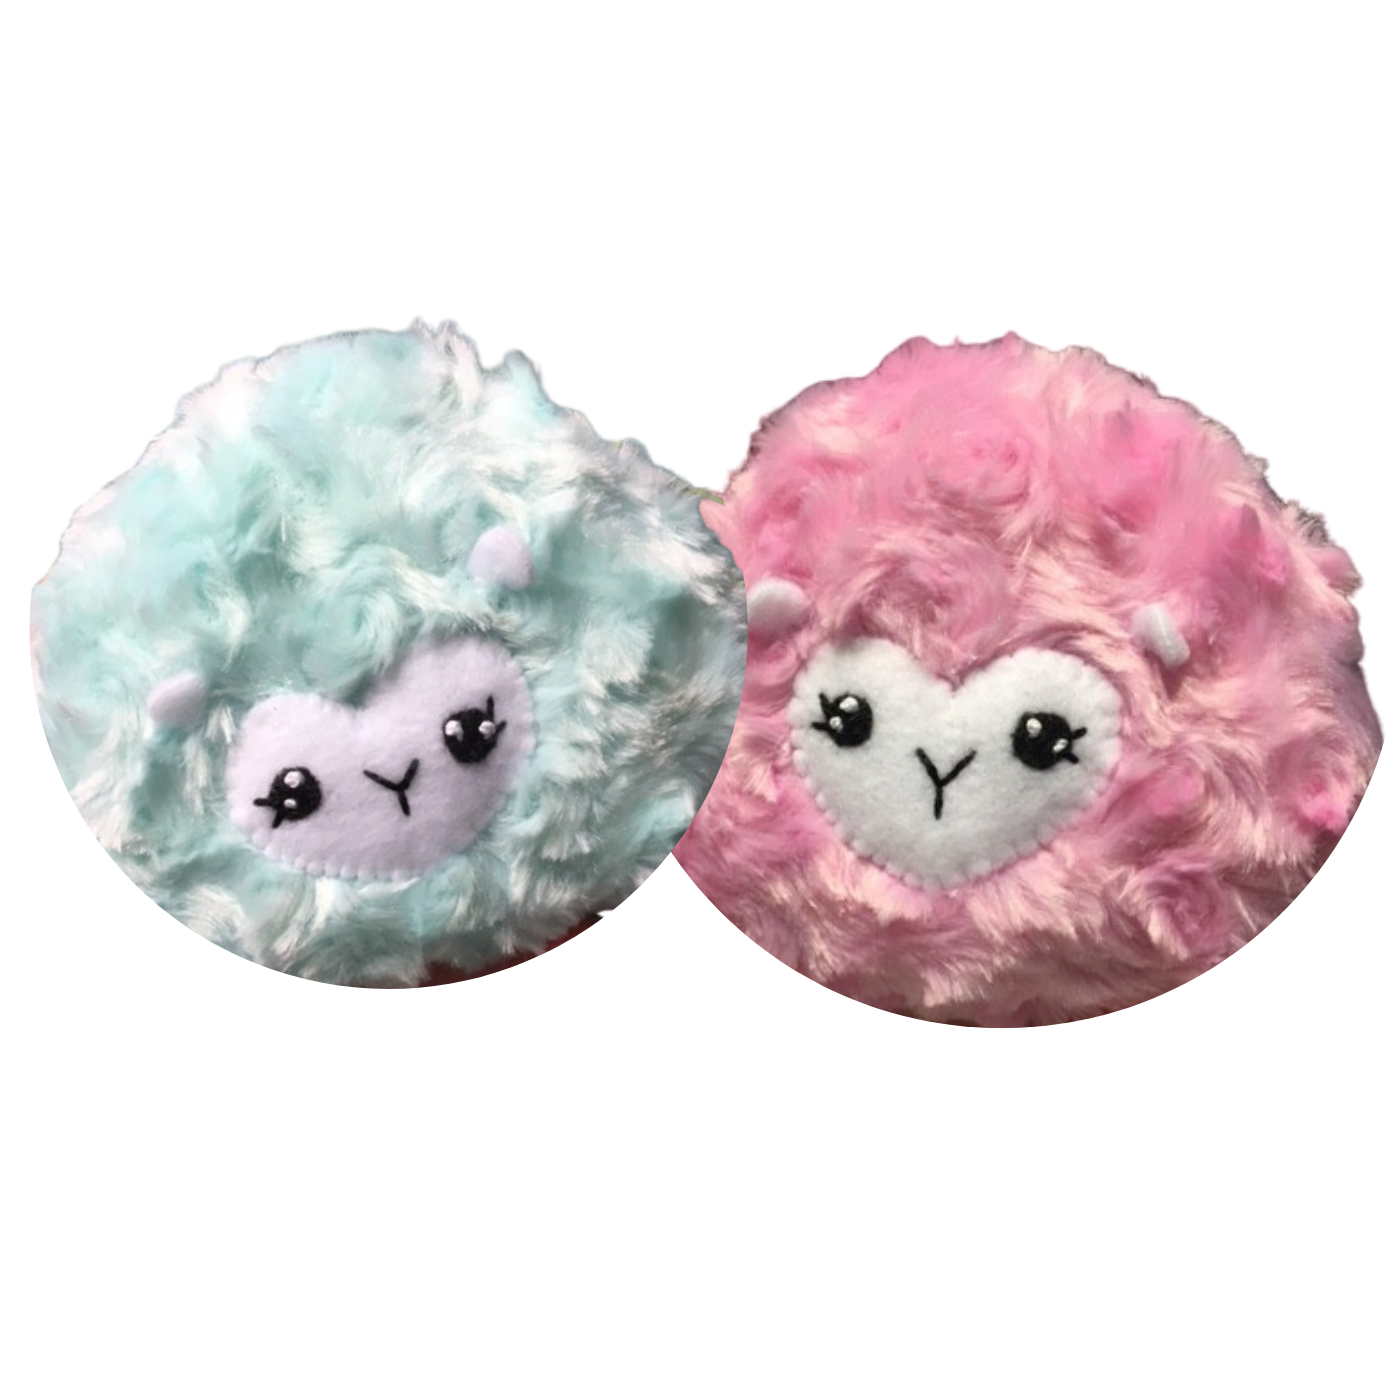 Pygmy puff craft picture of two spherical furry plush toys with heart shaped faces